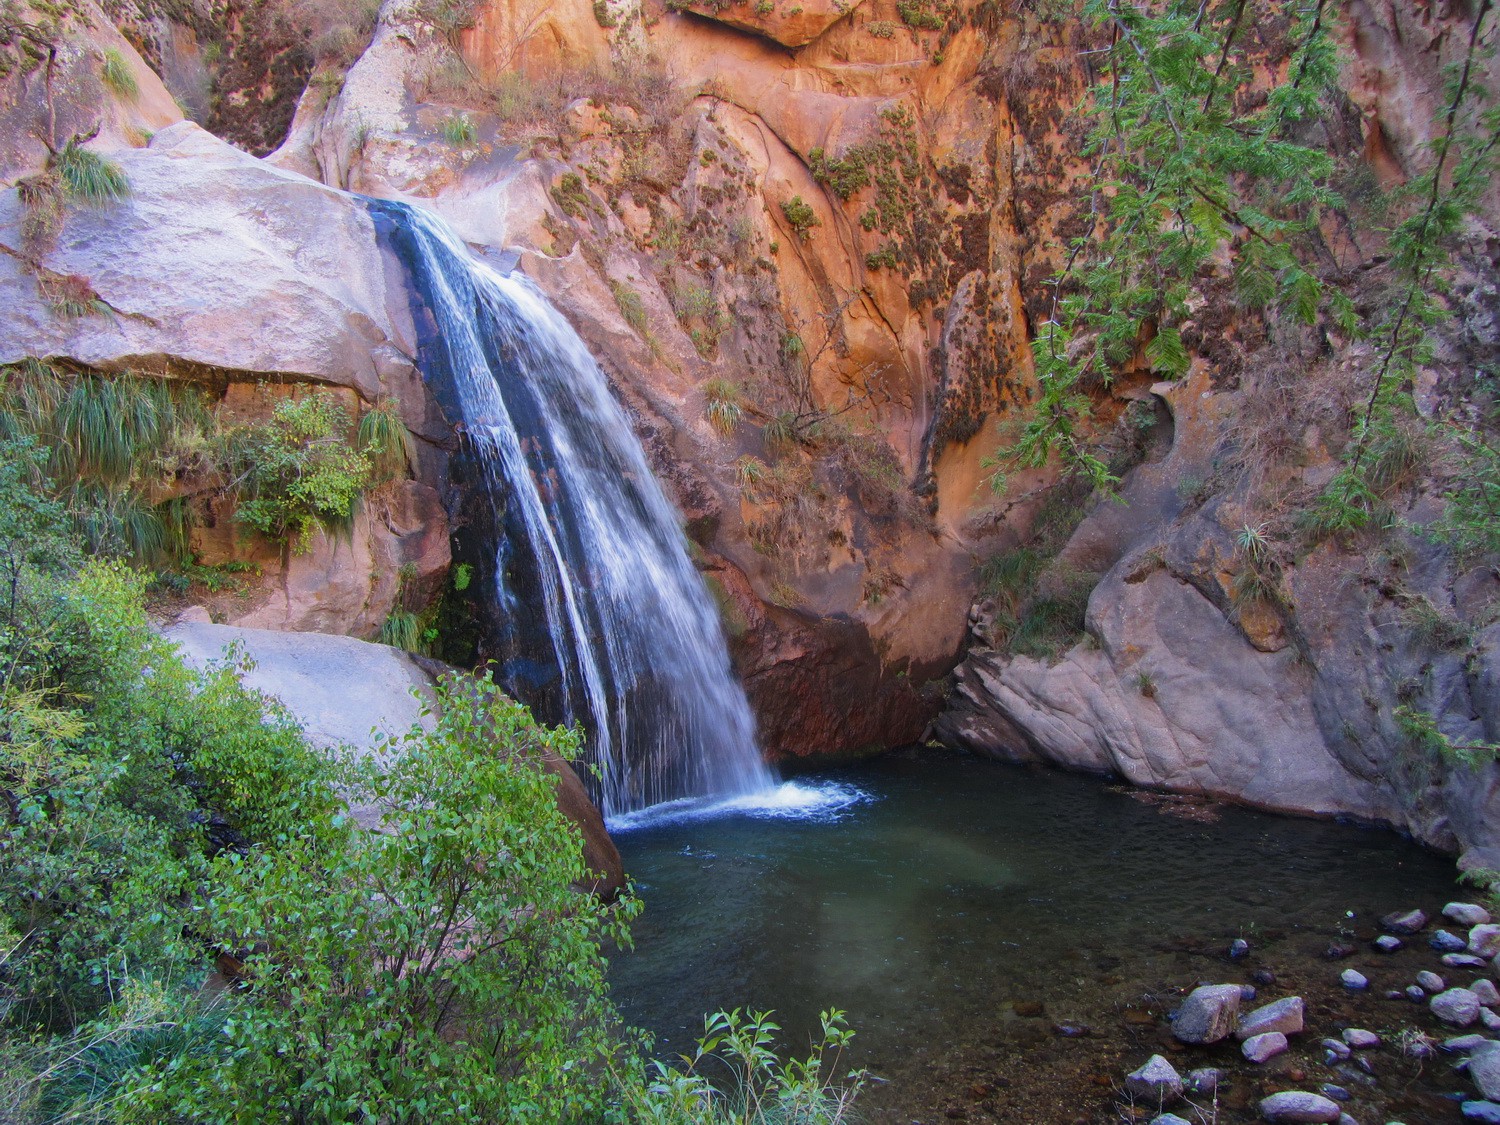 The waterfall at the end of the trail